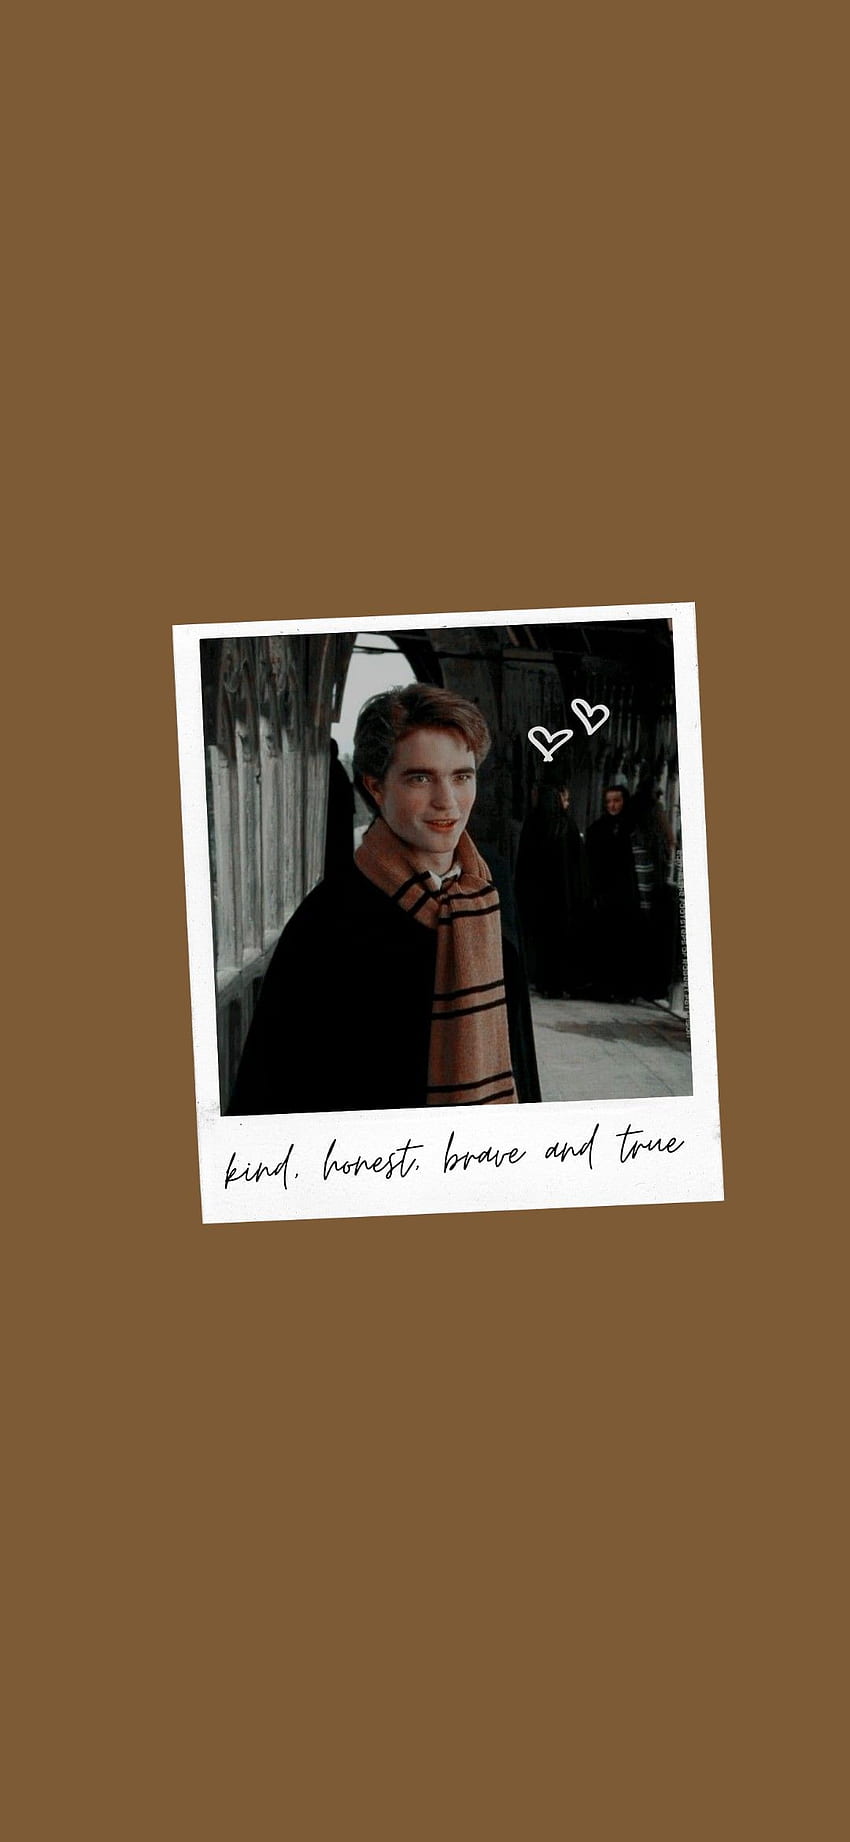 cedric diggory . Harry potter fanfiction, Harry potter movies, Harry potter friends HD phone wallpaper